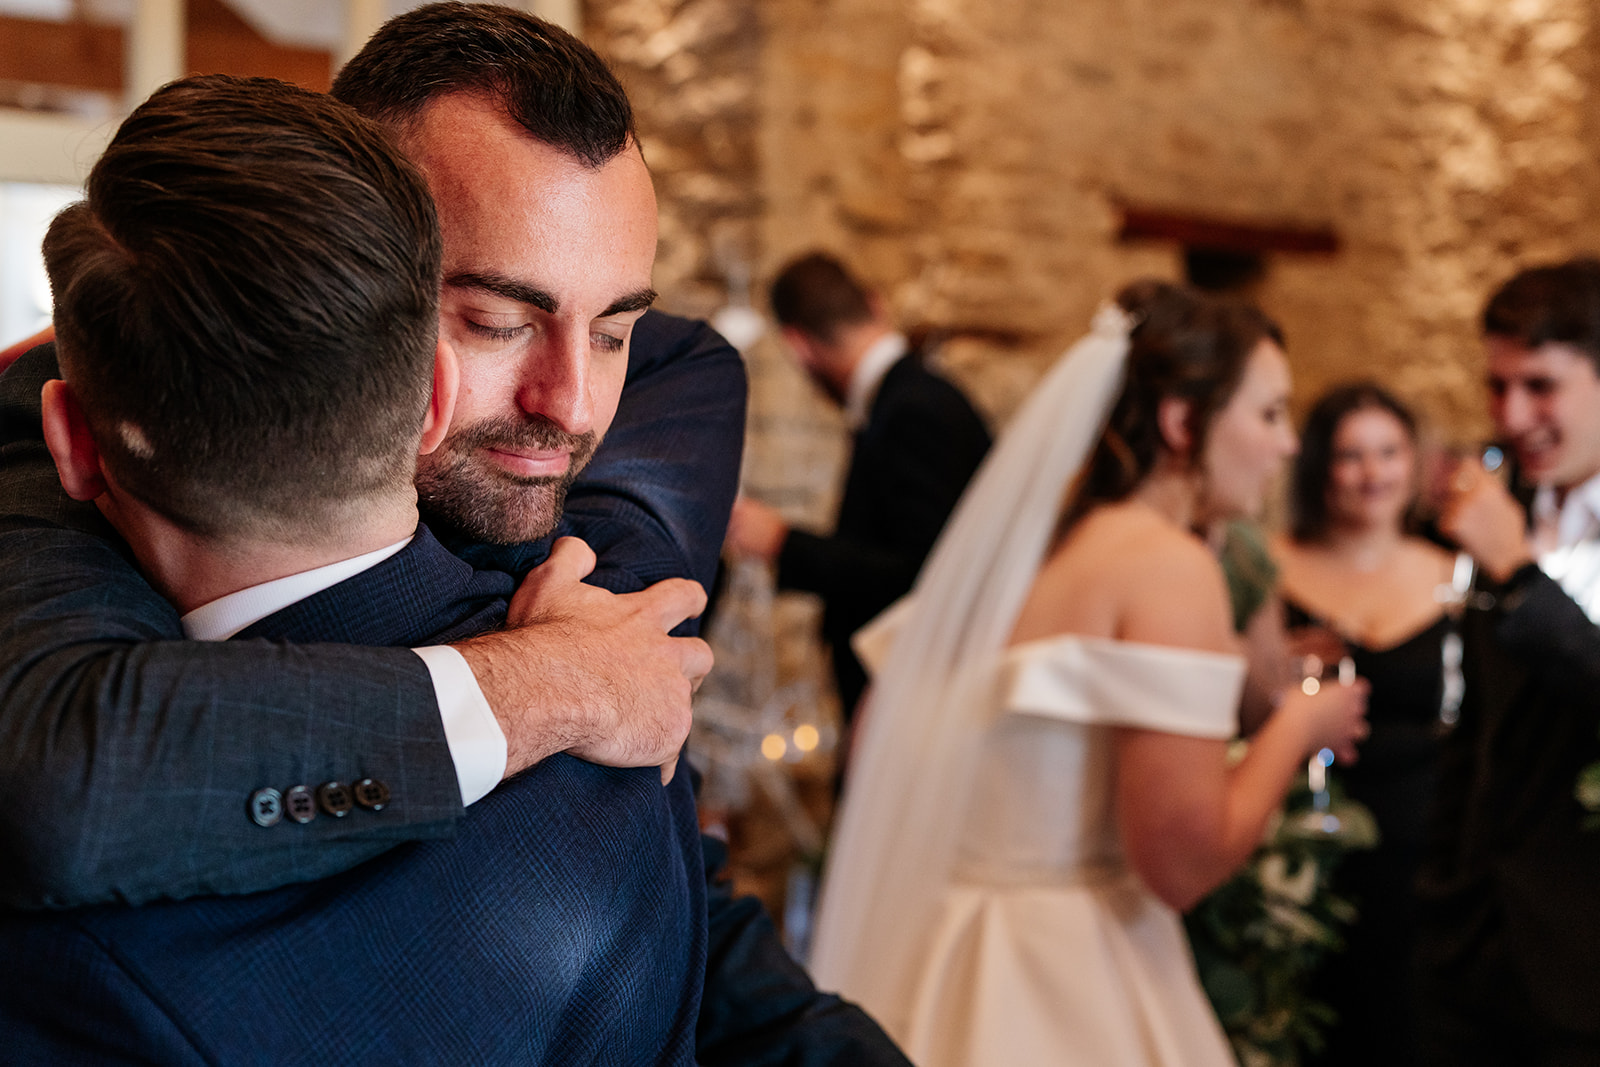 The groom receives a celebratory hug shortly after the ceremony 